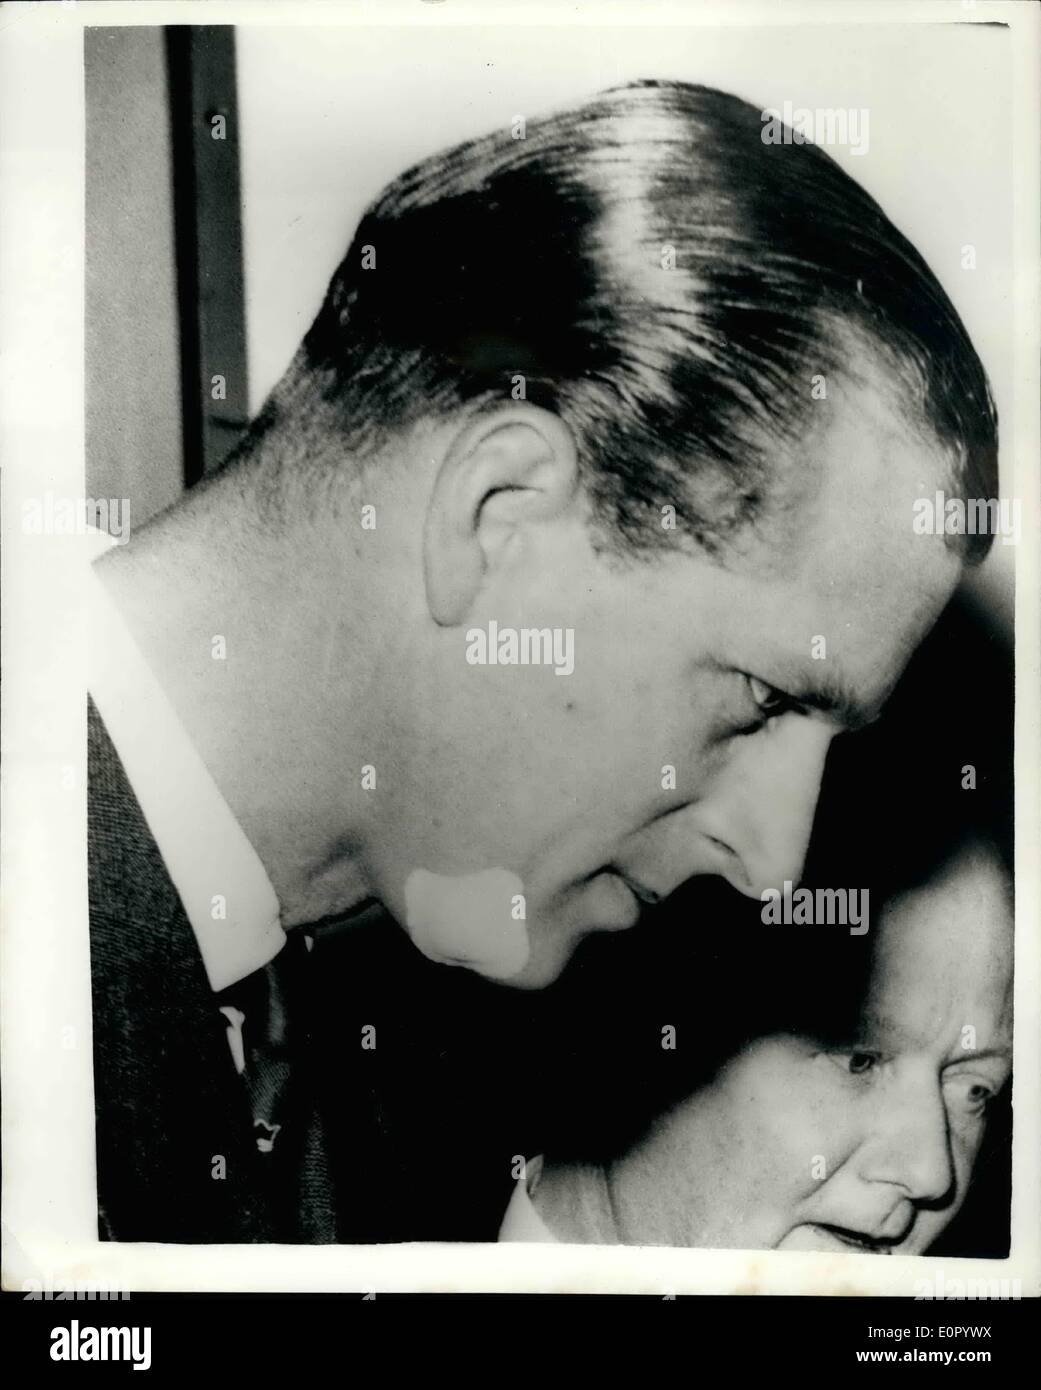 May 10, 1957 - Prince Philip presents ''Designs of the Year'' Award, wears plaster on chin.. - At a ceremony at the Design Centre, Regent Street - this afternoon, H.R.H. Prince Philip presented awards to the manufacturers of the 12 products selected for their outstanding design from some 3,500 articles showing at the centre during its first year. The products selected for the awards cover a wide range and include a TV receiver, a convector open fire, a carpet, wallpaper, china, oven glass - table galss cutlery and a settee-bed Stock Photo